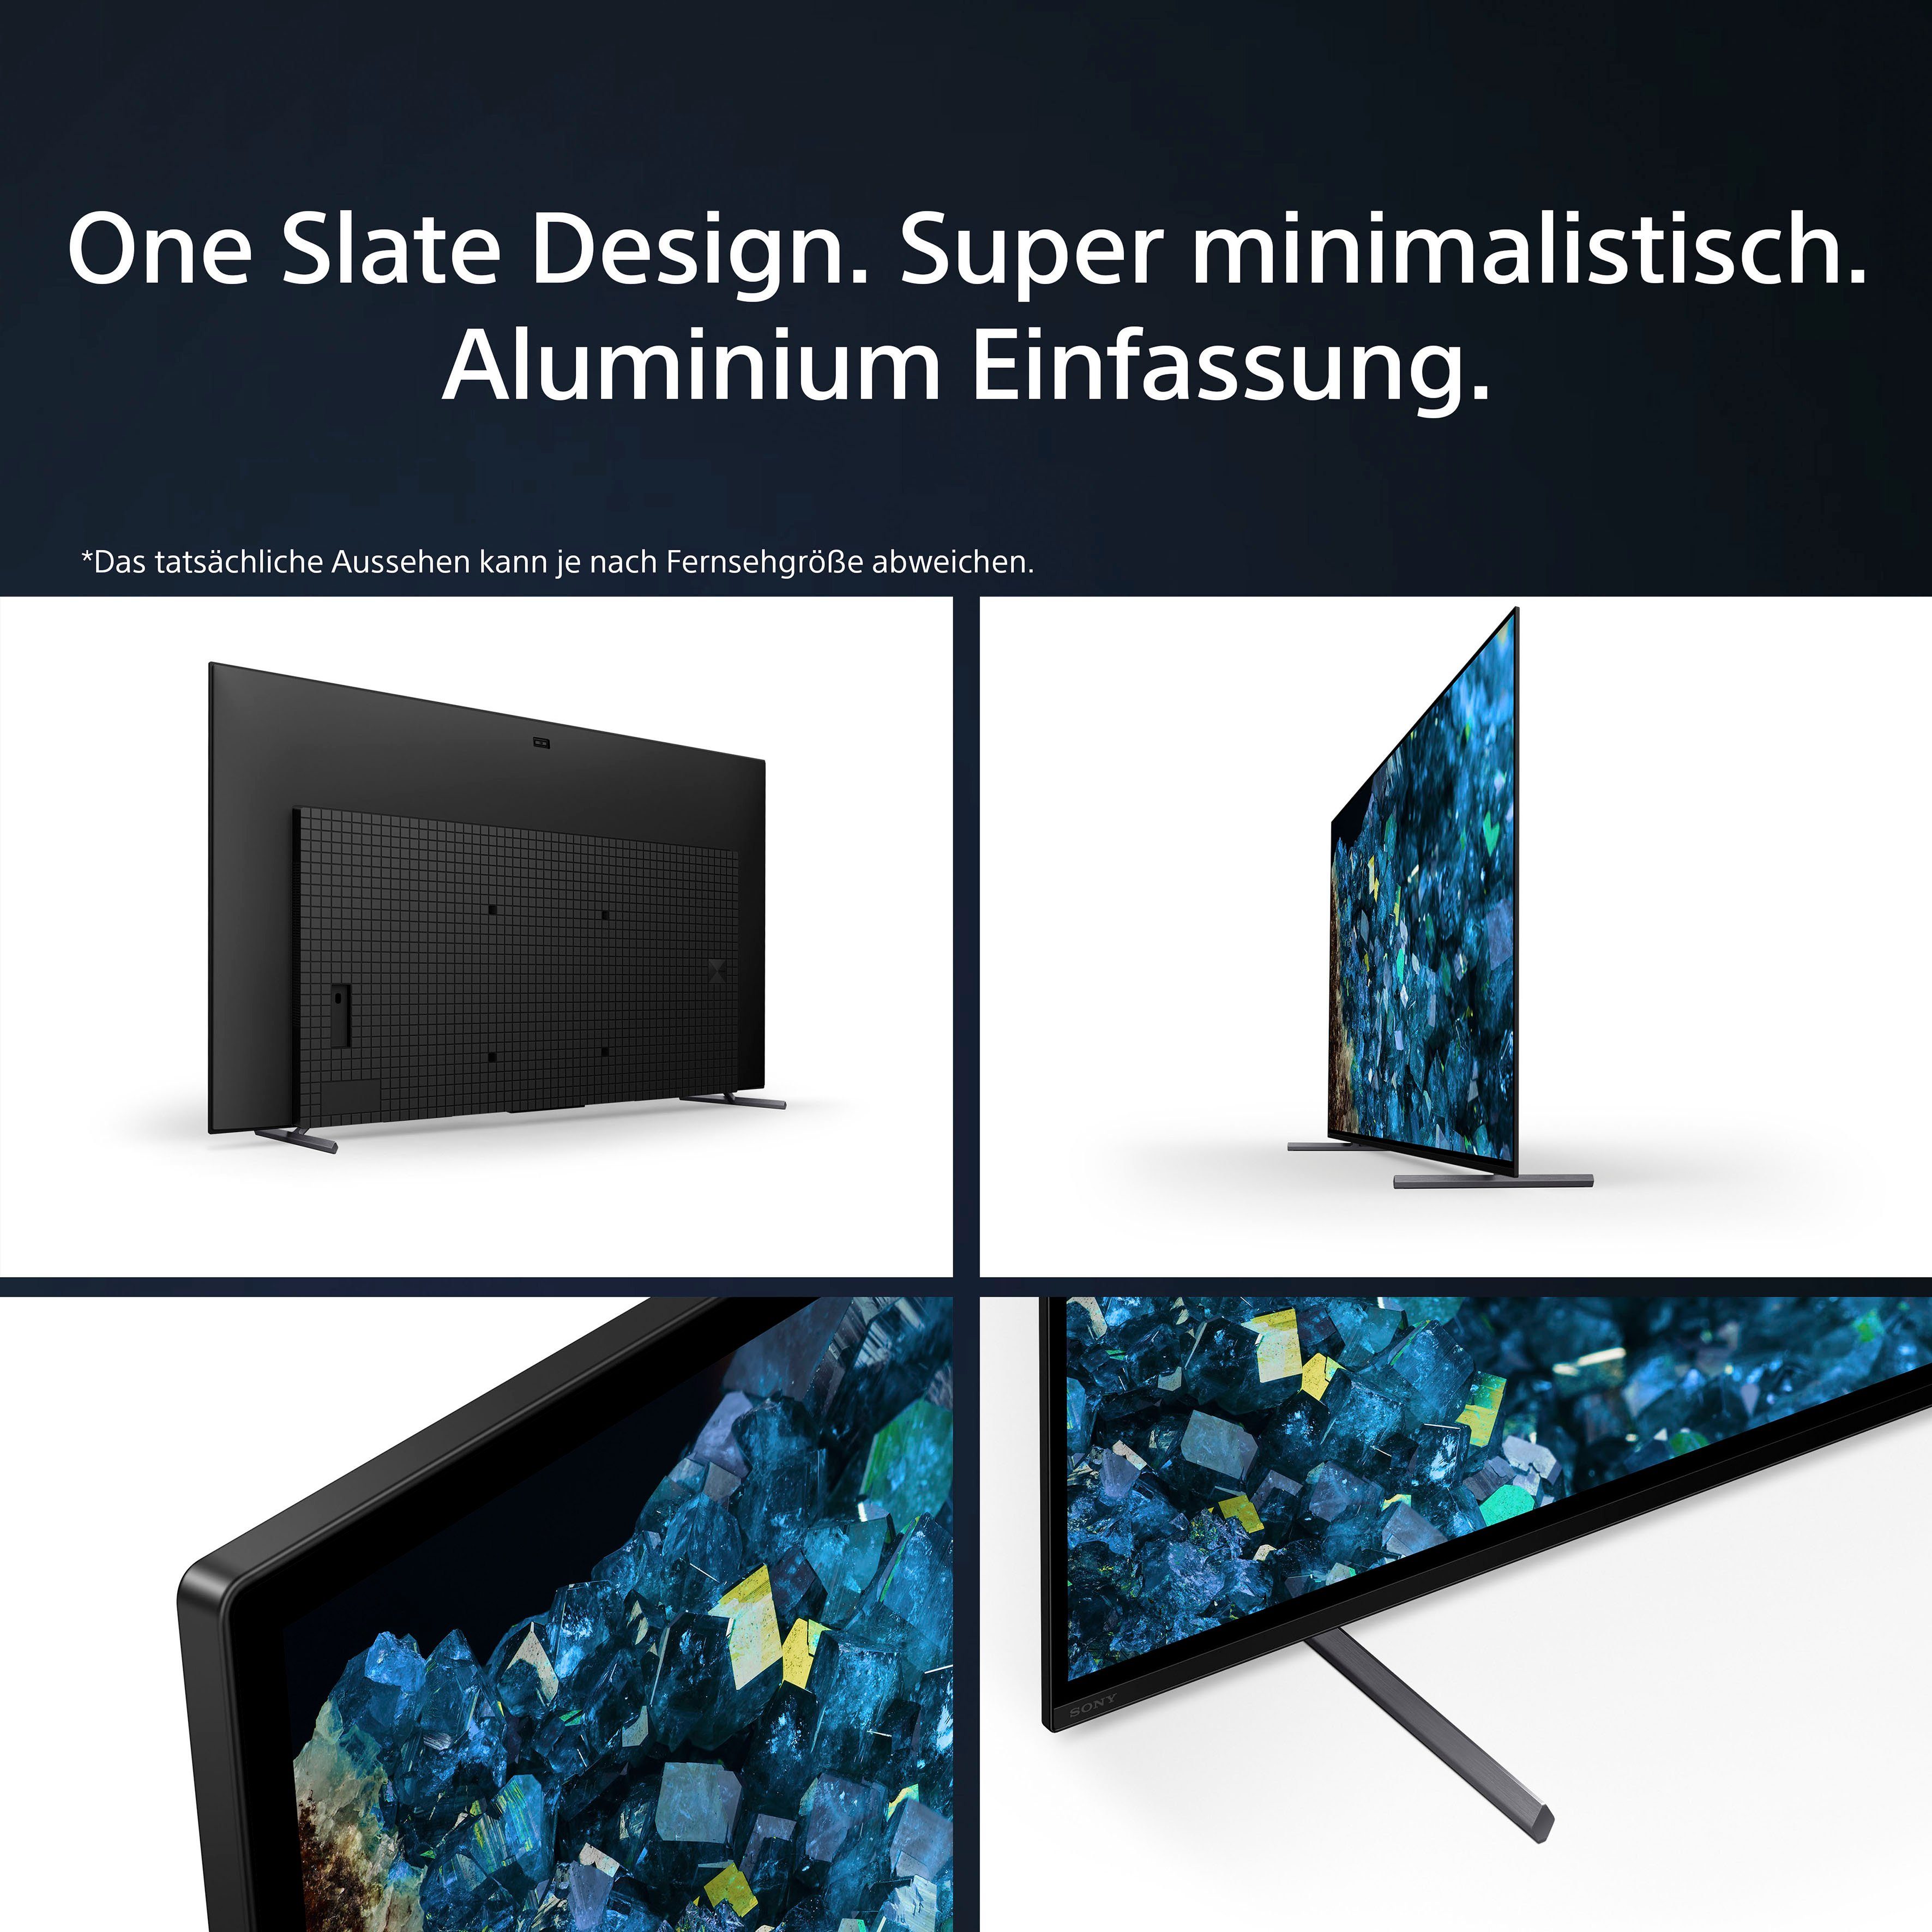 exklusiven (164 TV, CORE, XR-65A80L HD, Ultra TV, PS5-Features) BRAVIA TRILUMINOS OLED-Fernseher mit Zoll, Smart-TV, cm/65 Sony Google Android PRO, 4K Smart-TV,